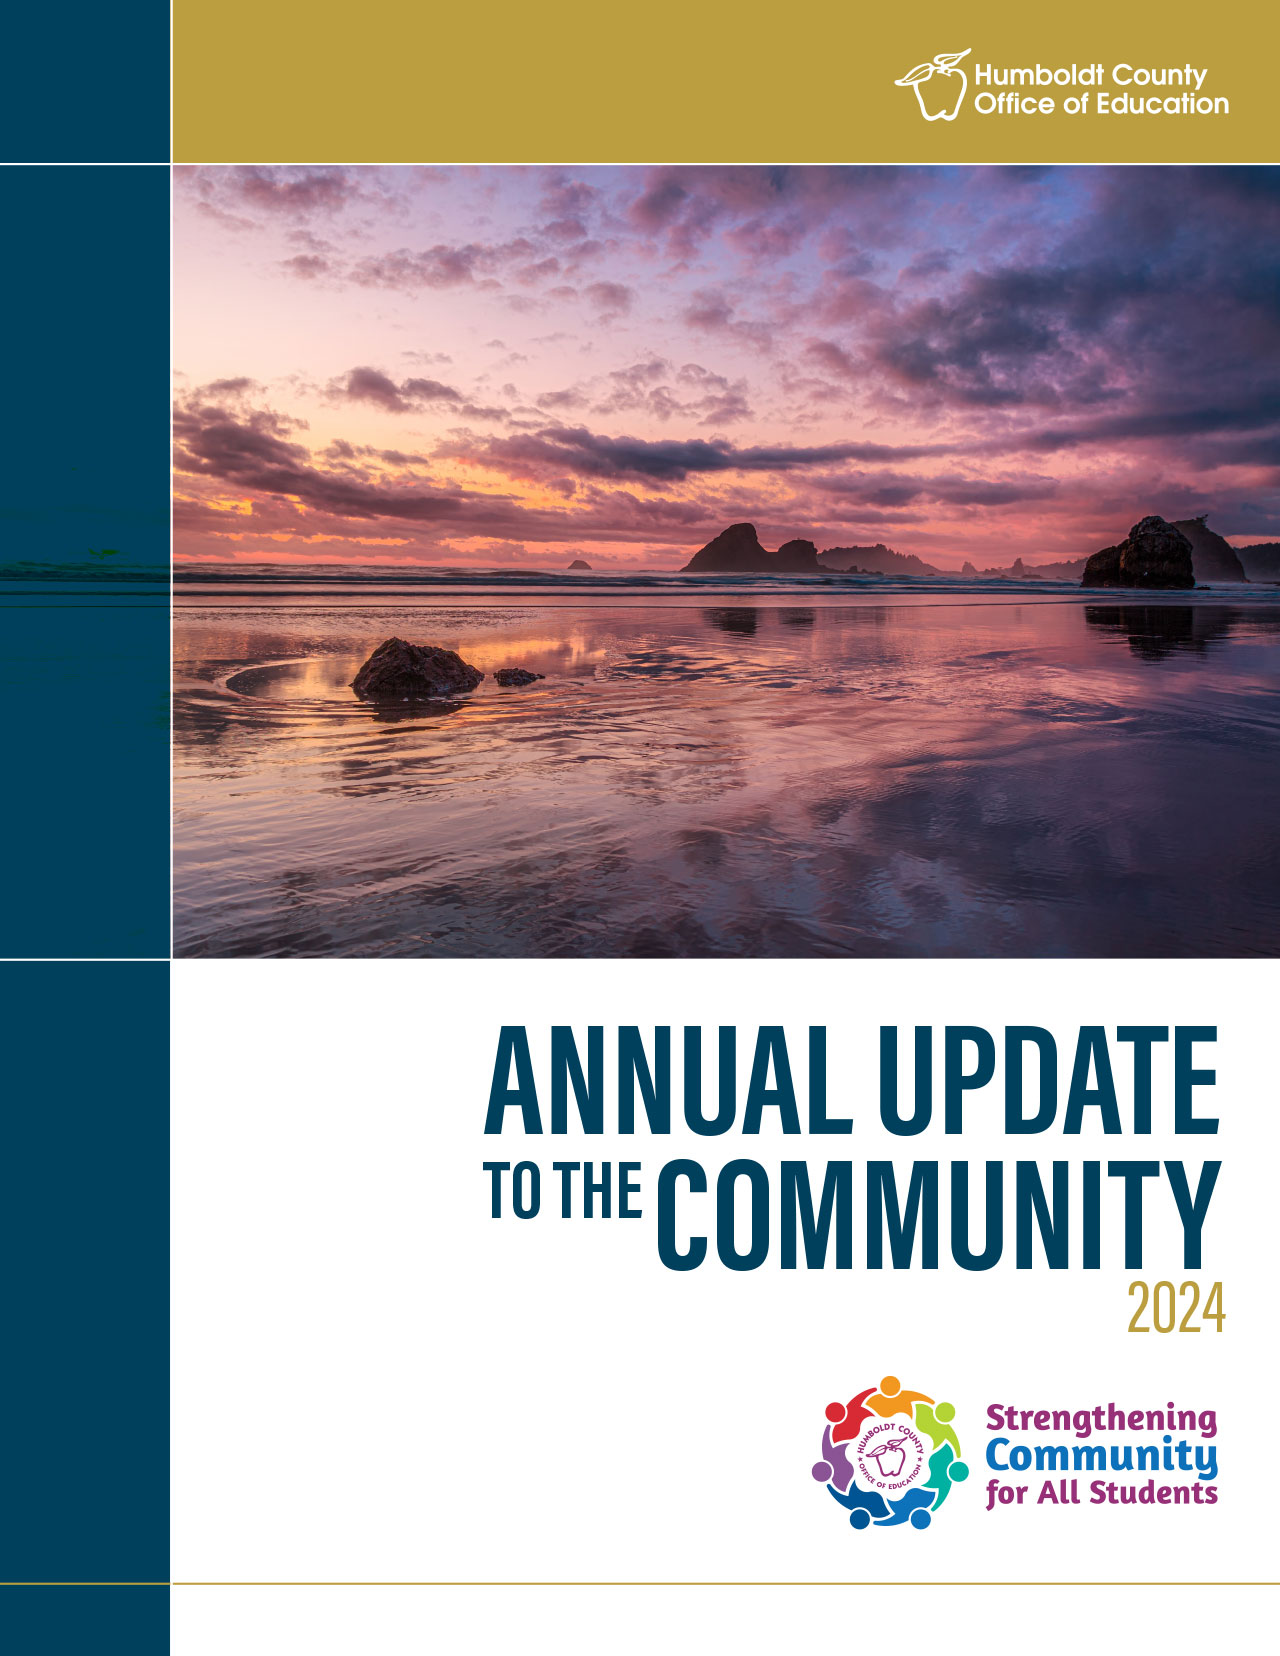 Image of the cover of the HCOE 2024 Annual Update to the Community